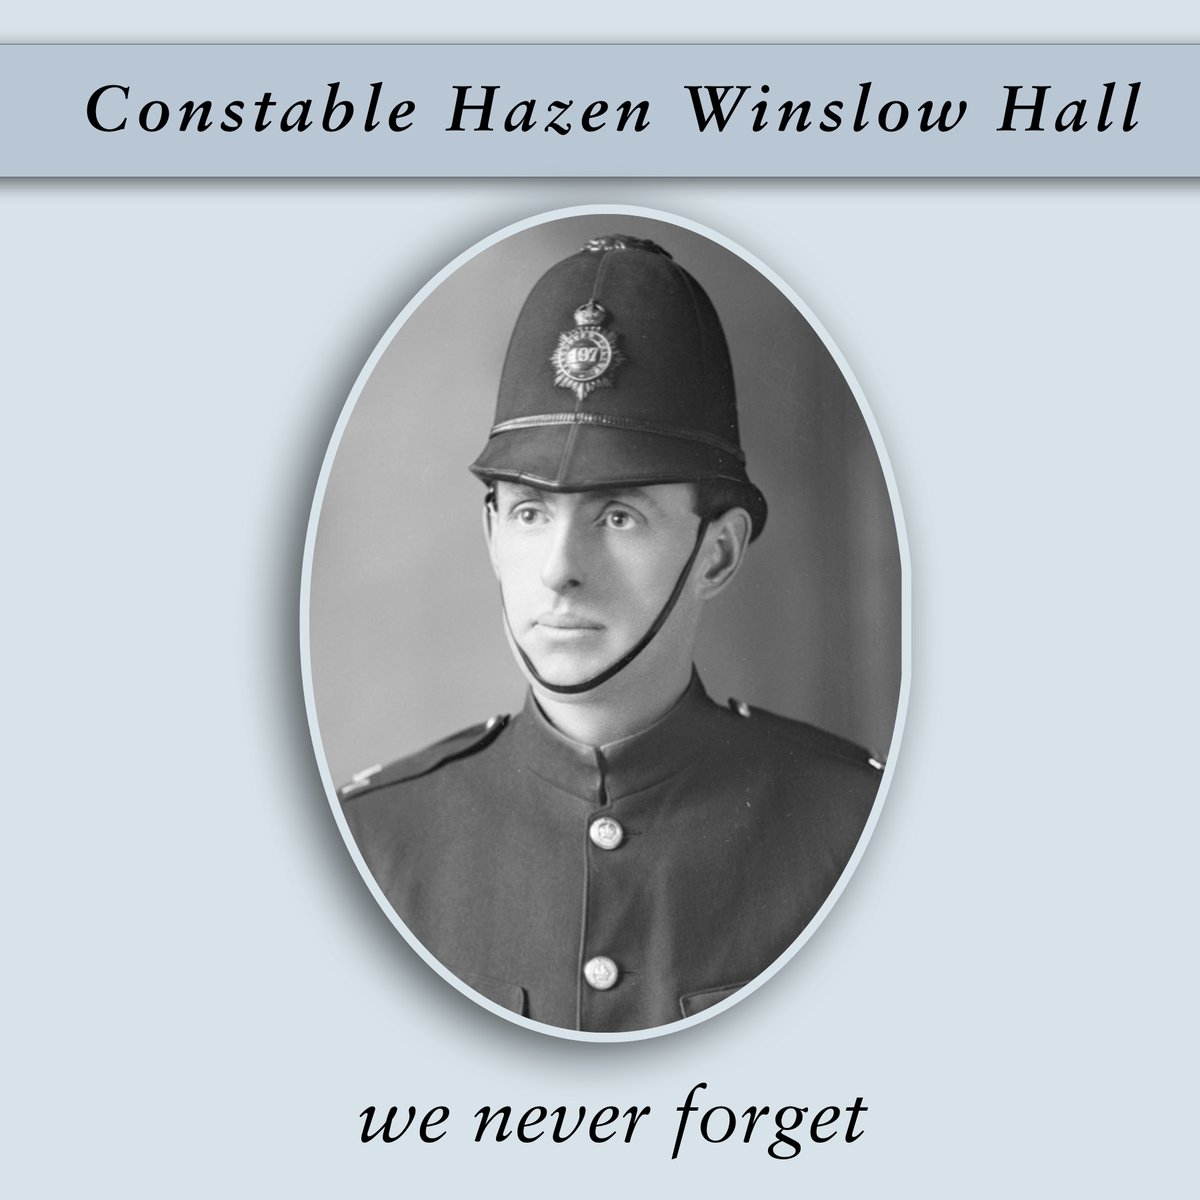 We #NeverForget Cst. Hazen Winslow Hall who joined #VPD in 1913 & served as an #Infantry Corporal with the @CanadianArmy during #WWI. He was killed on the #battlefield in #France 107 yrs ago today while bravely serving @Canada @VancouverPD @CanadianForces #WW1 #VancouversFinest